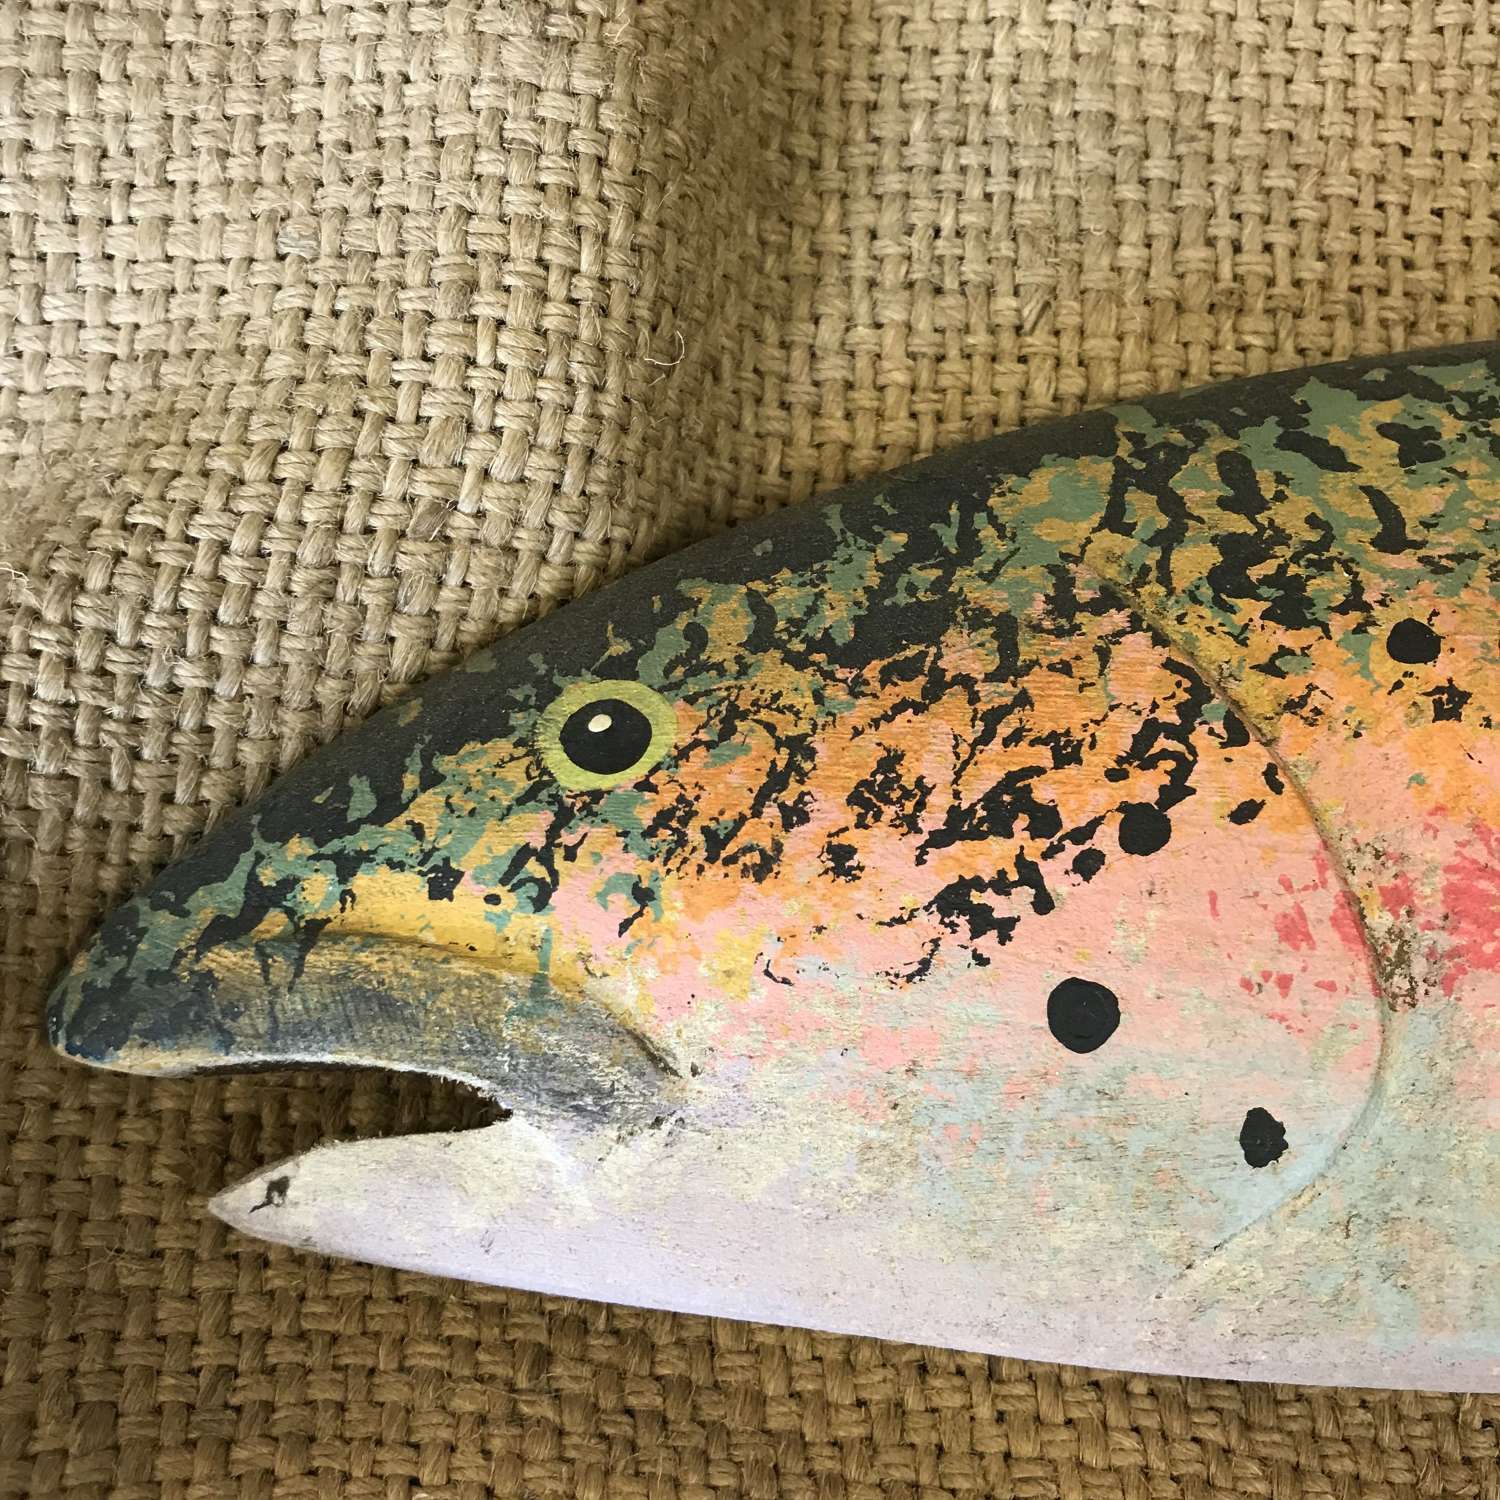 Contemporary sculpture of a rainbow trout